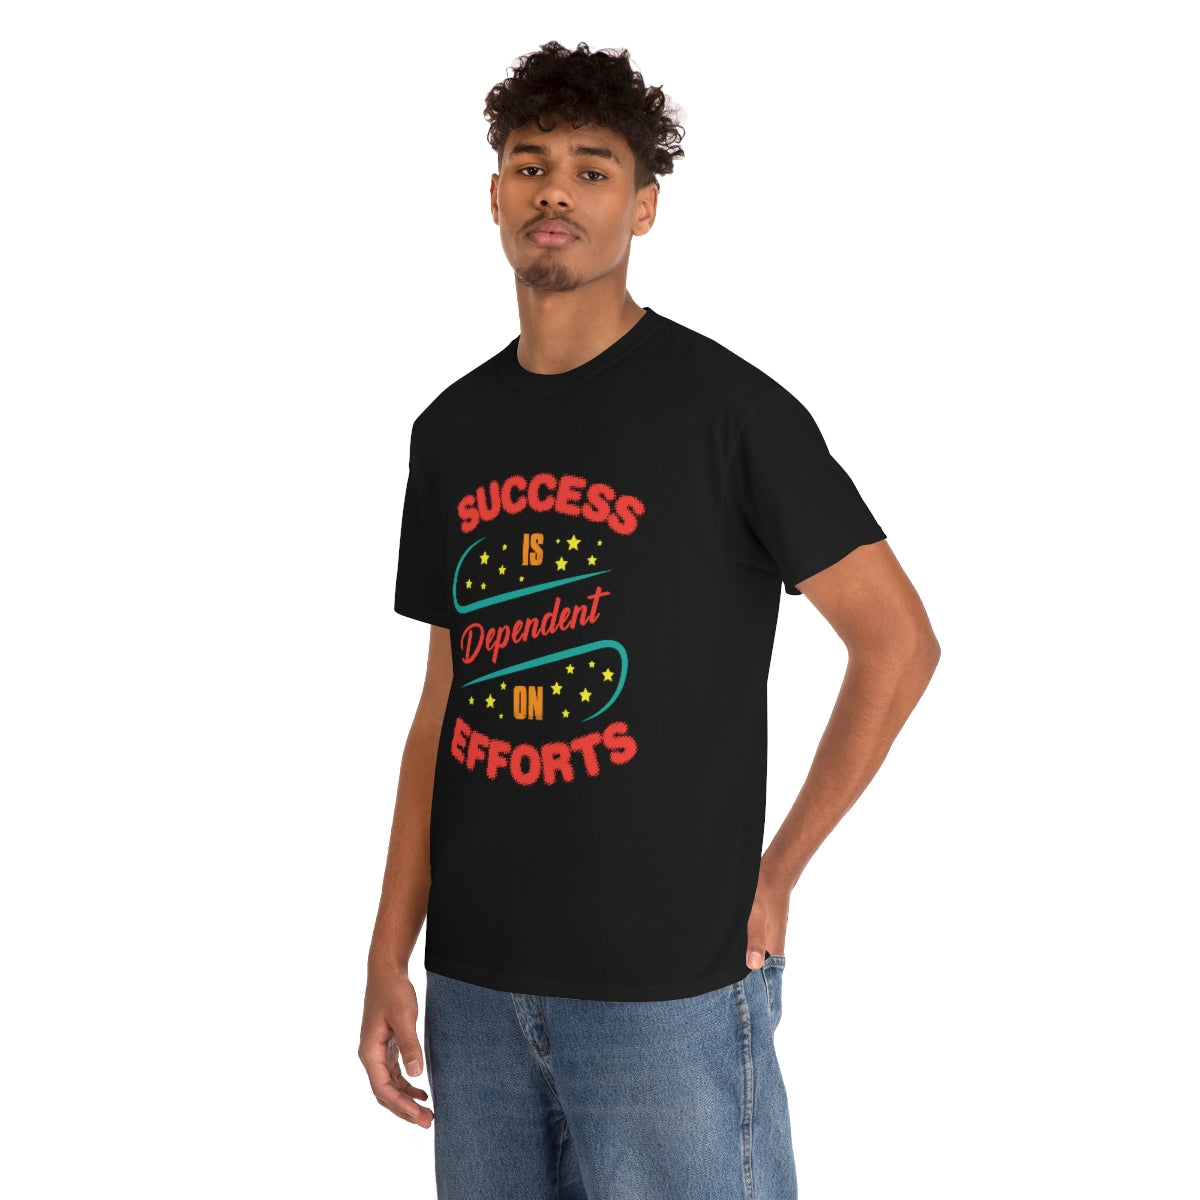 Success is dependent on efforts Heavy Cotton T-Shirt